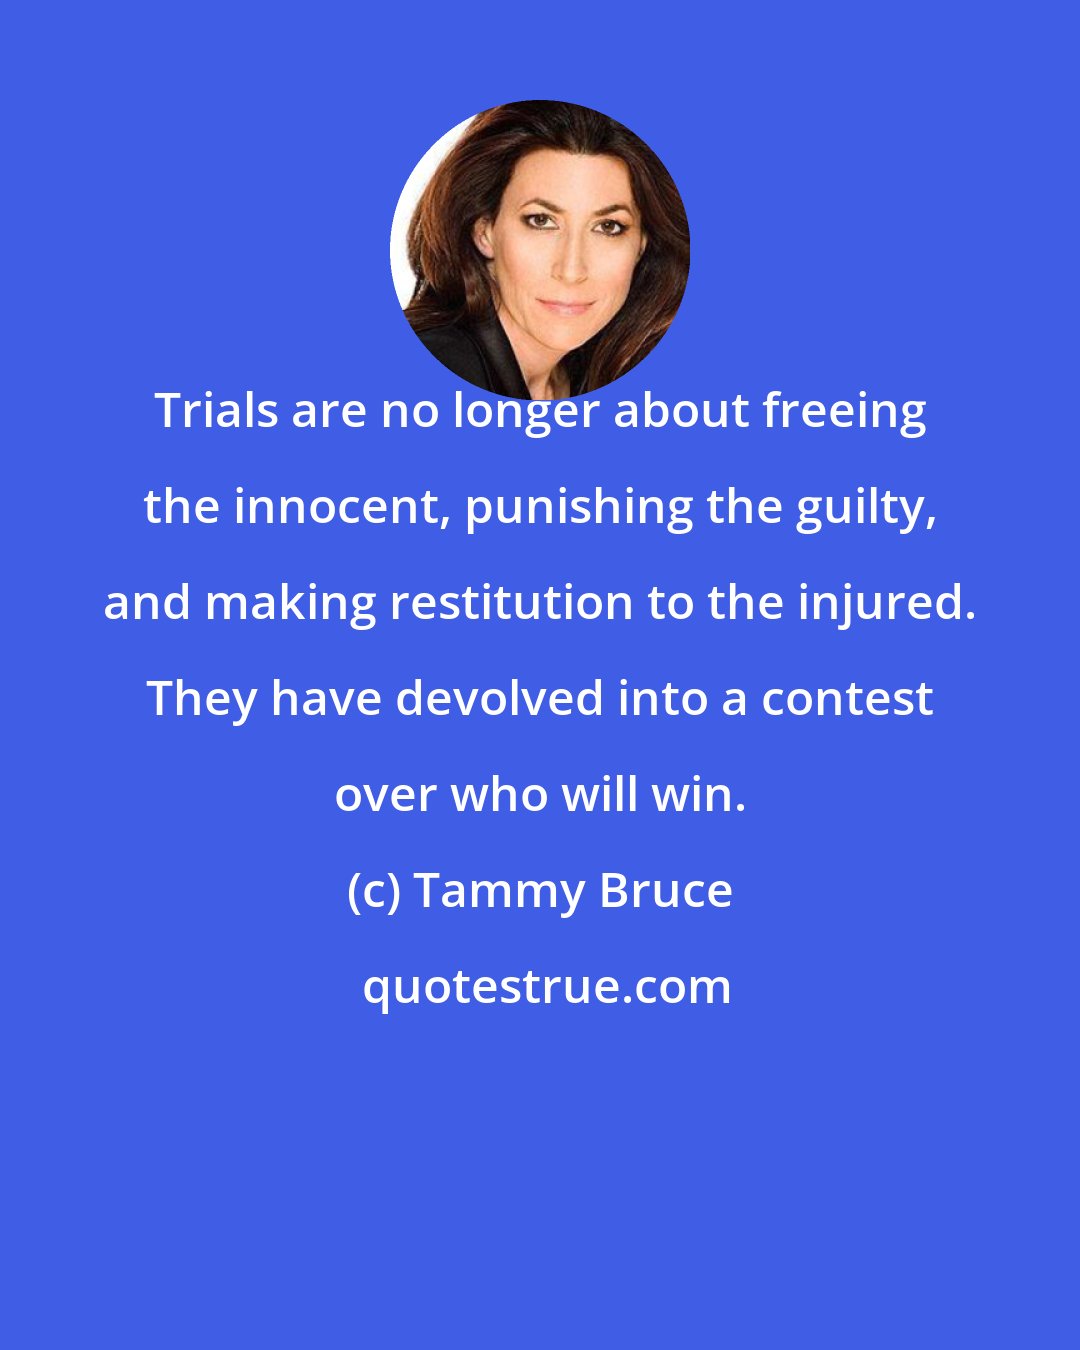 Tammy Bruce: Trials are no longer about freeing the innocent, punishing the guilty, and making restitution to the injured. They have devolved into a contest over who will win.